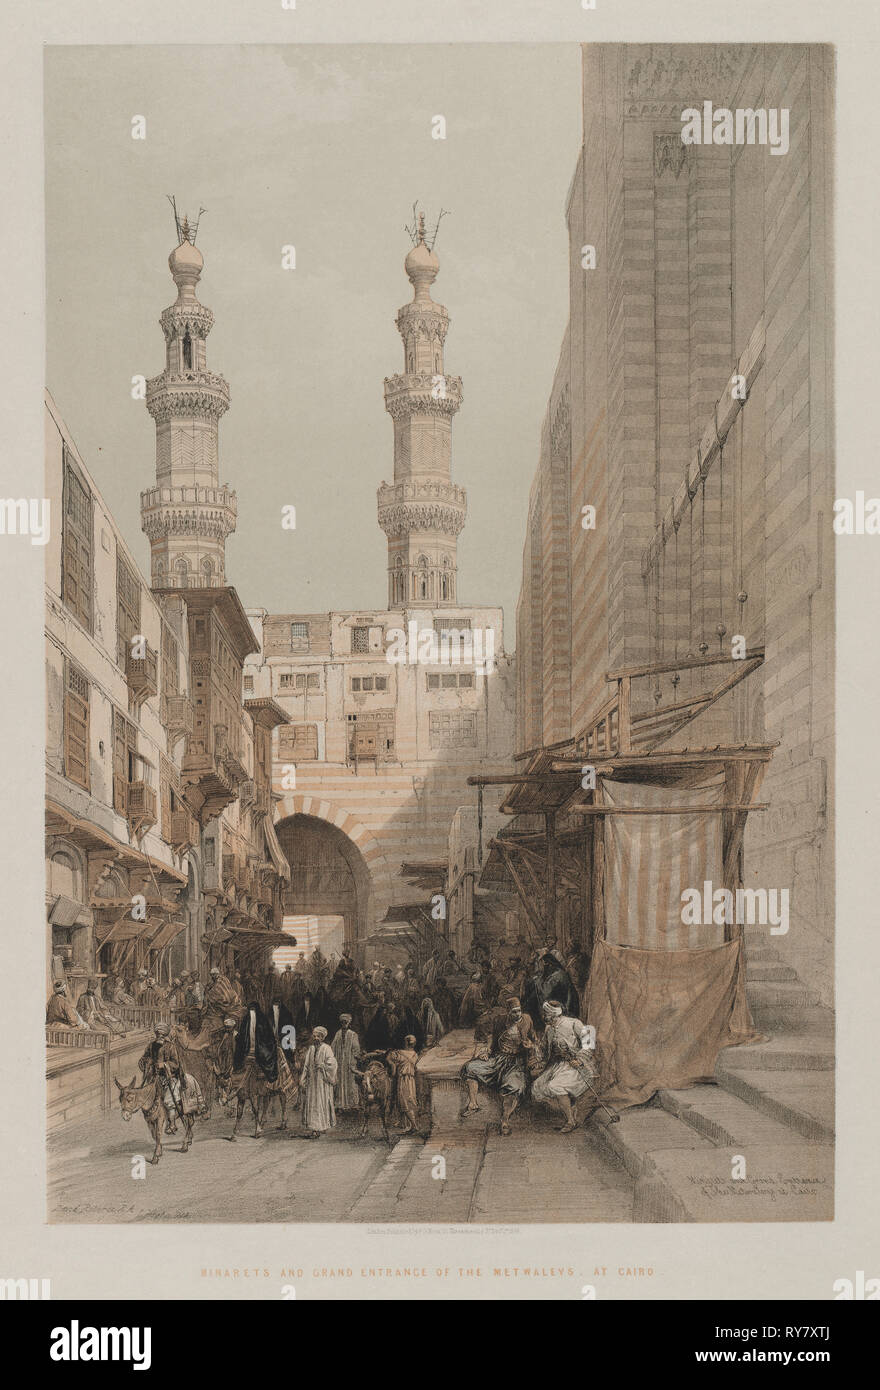 Egypt and Nubia, Volume III: Minarets, and Grand Entrance of the Metwaleys, at Cairo, 1848. Louis Haghe (British, 1806-1885), F.G.Moon, 20 Threadneedle Street, London, after David Roberts (British, 1796-1864). Color lithograph; sheet: 63 x 43.1 cm (24 13/16 x 16 15/16 in.); image: 48.6 x 32.5 cm (19 1/8 x 12 13/16 in Stock Photo